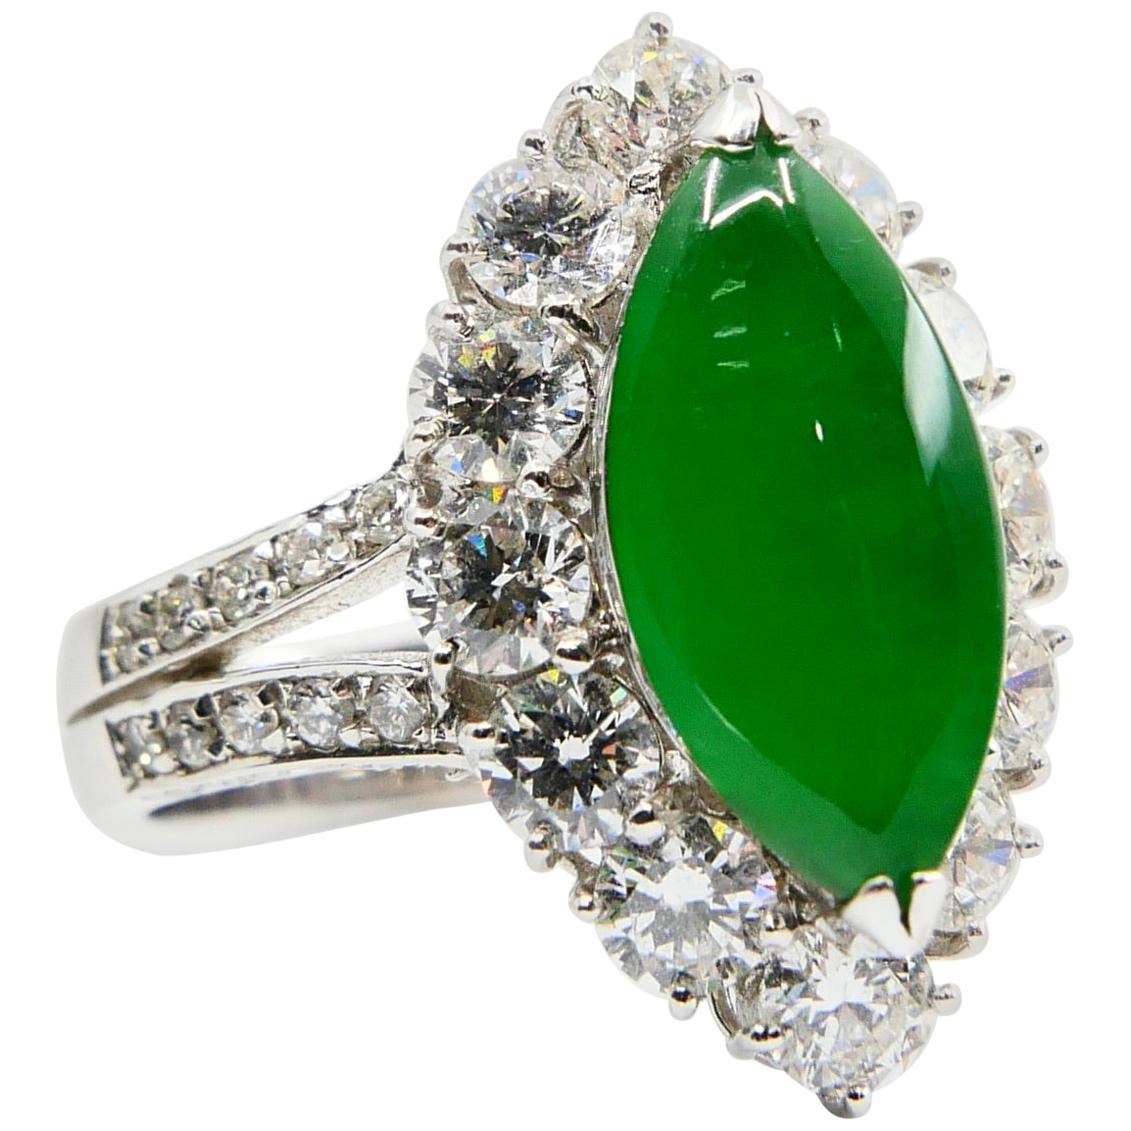 Certified Type A Jadeite Jade Diamond And Cocktail Ring, Imperial Green Color